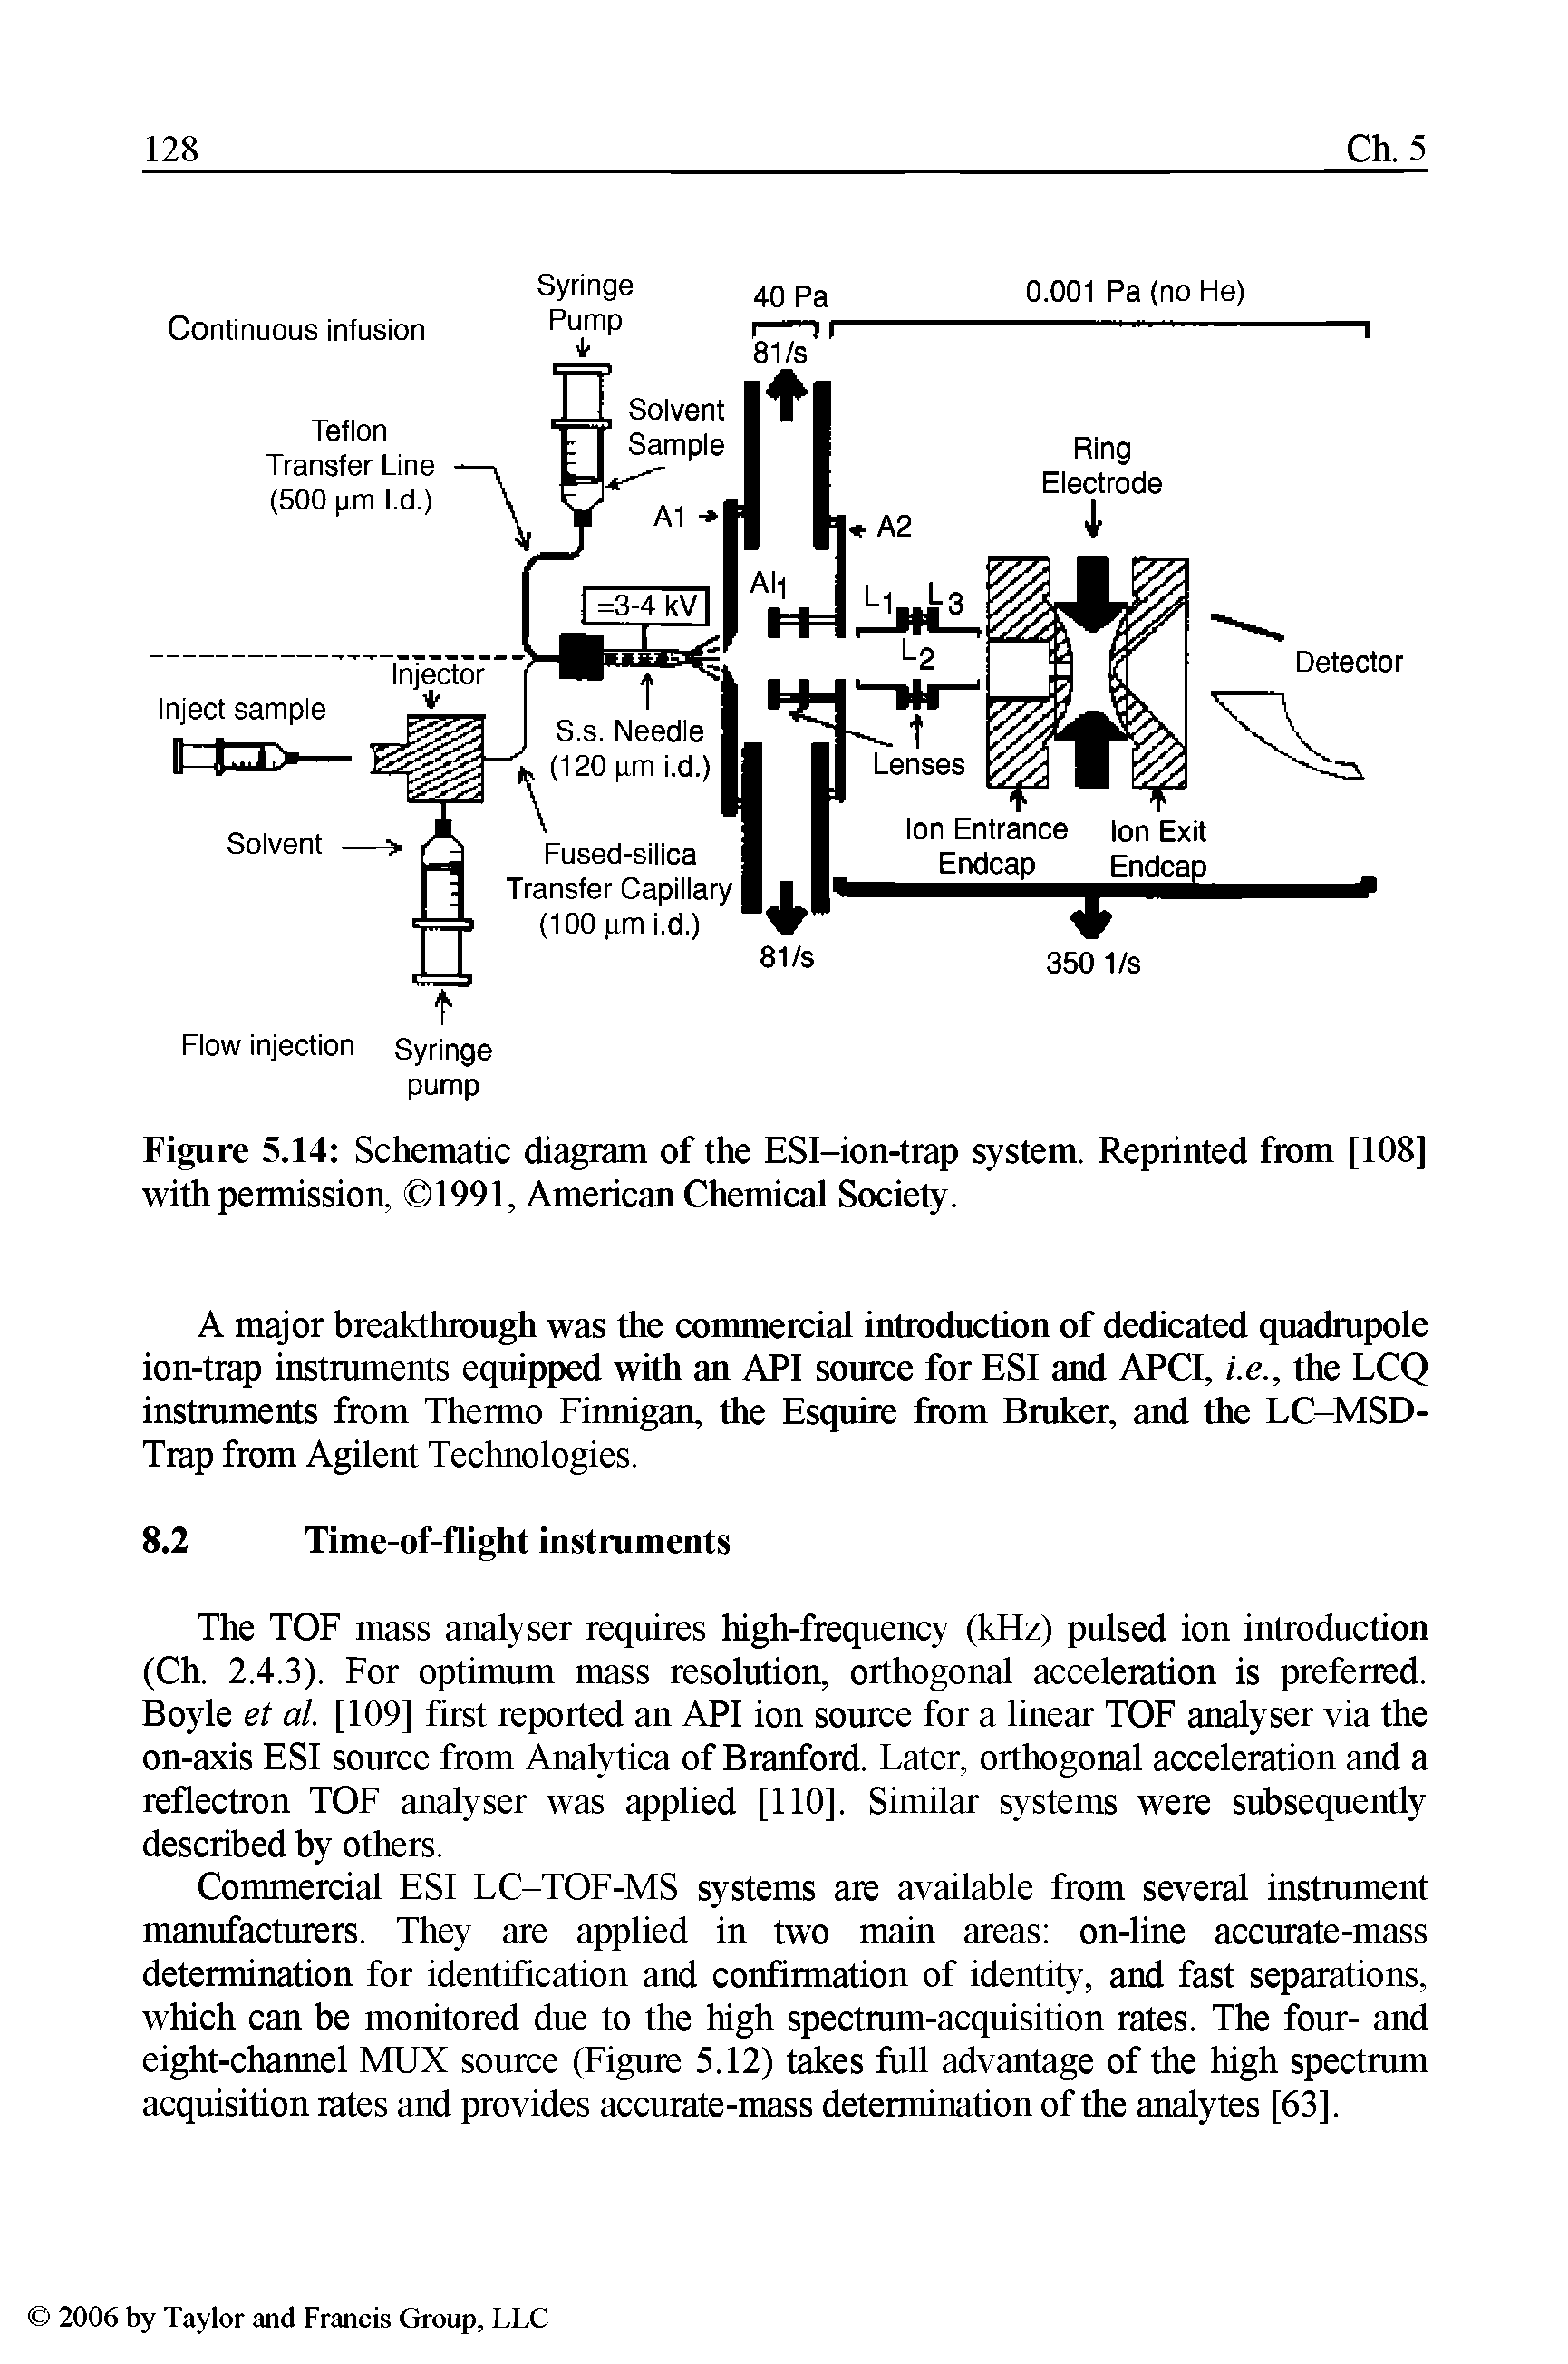 Figure 5.14 Schematic diagram of the ESI-ion-trap system. Reprinted from [108] with permission, 1991, Ameriean Chemieal Soeiety.